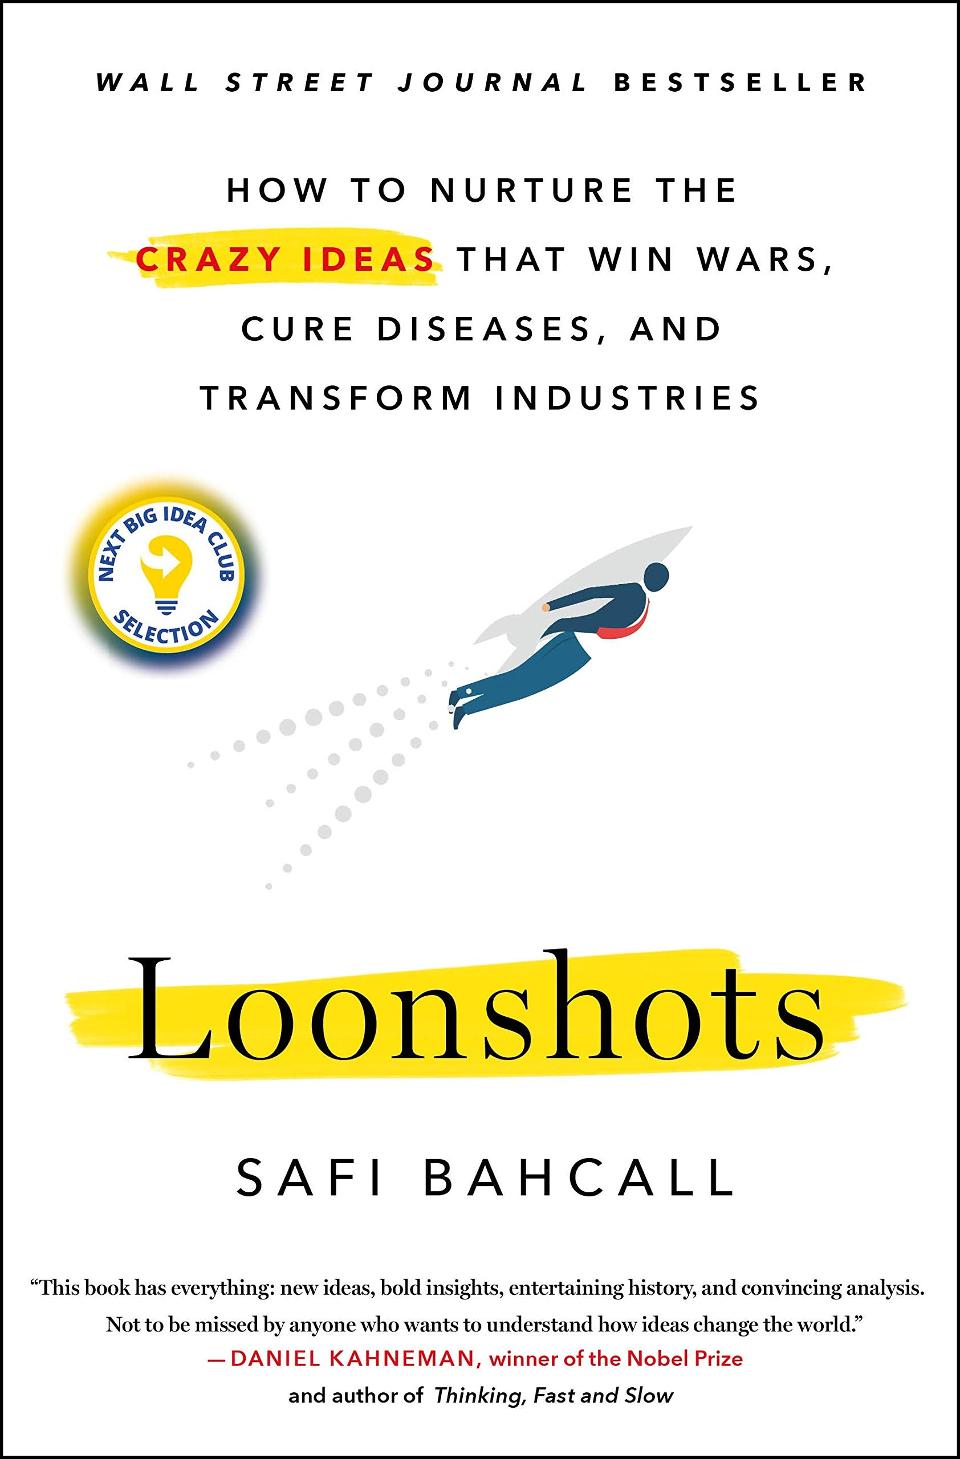 Loonshots: How to Nurture the Crazy Ideas That Win Wars, Cure Diseases, and Transform Industries by Safi Bahcall